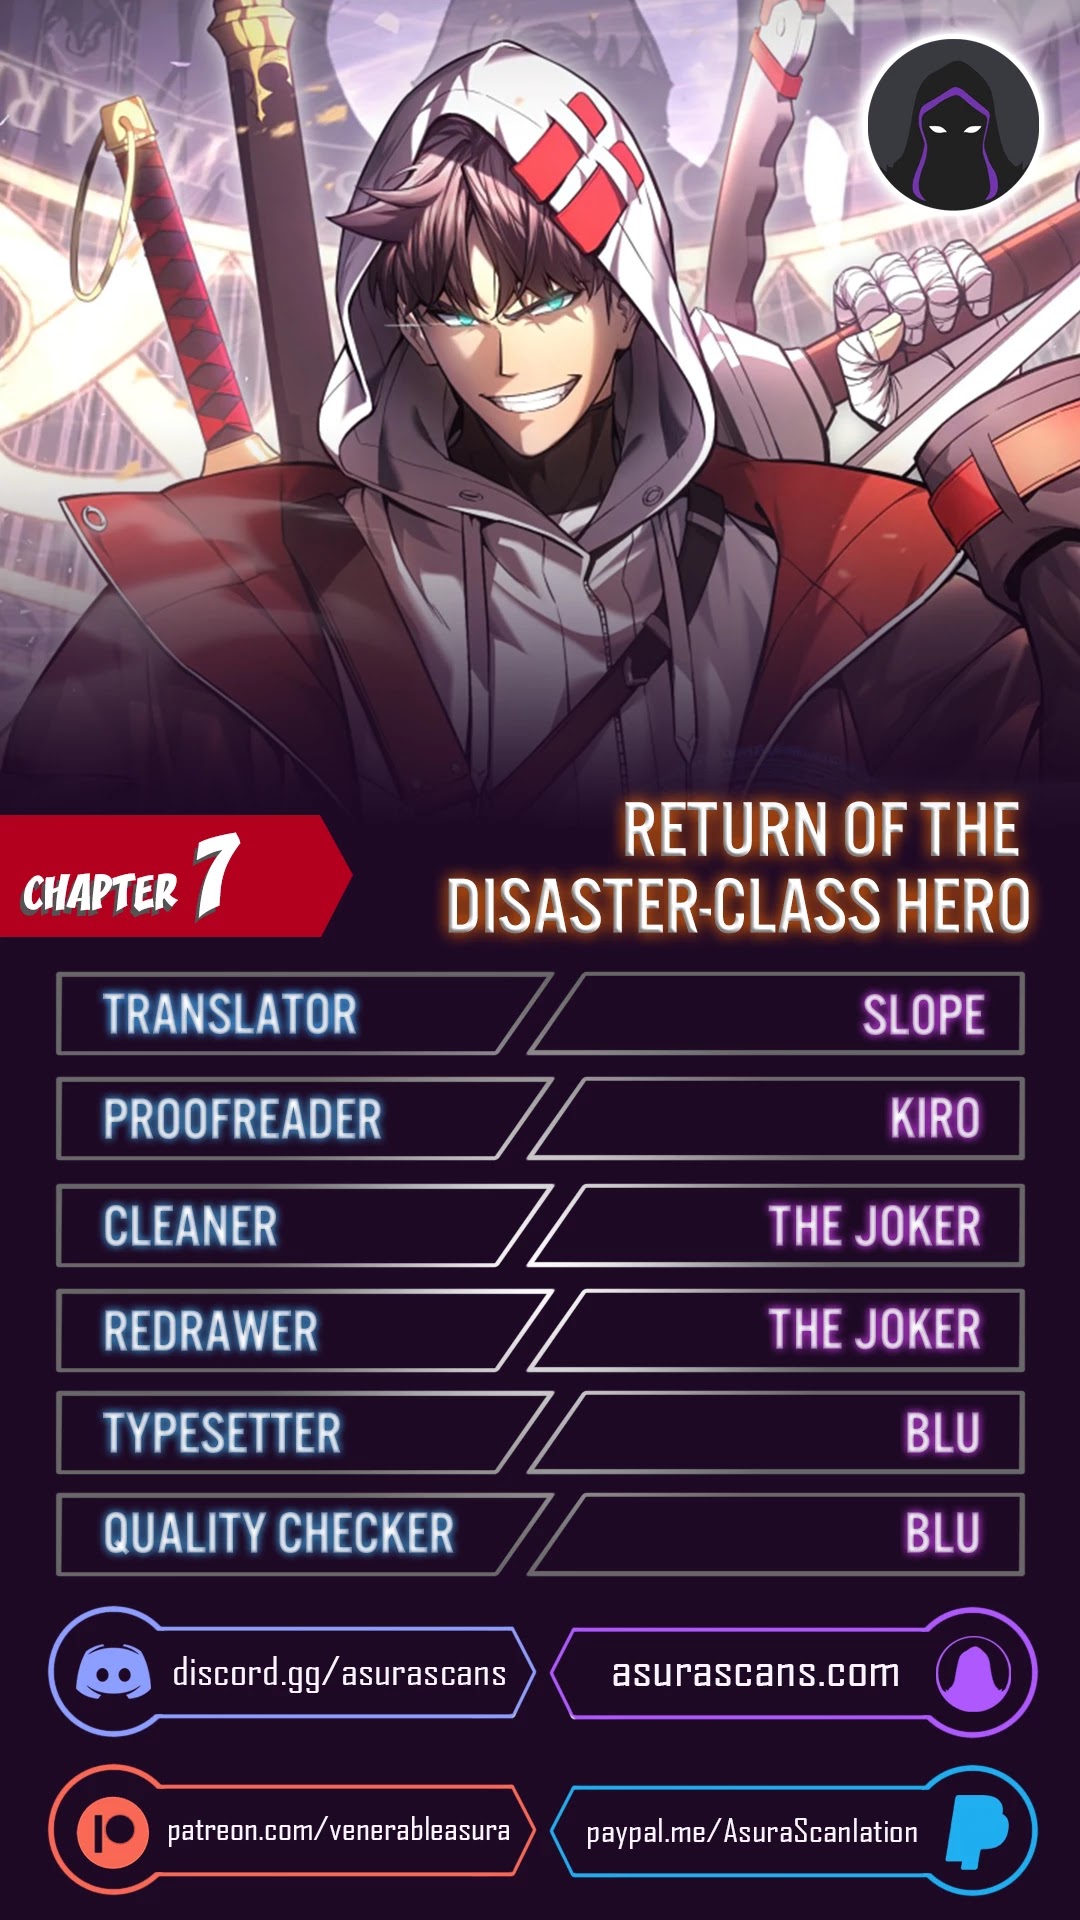 The Return Of The Disaster-Class Hero Chapter 7